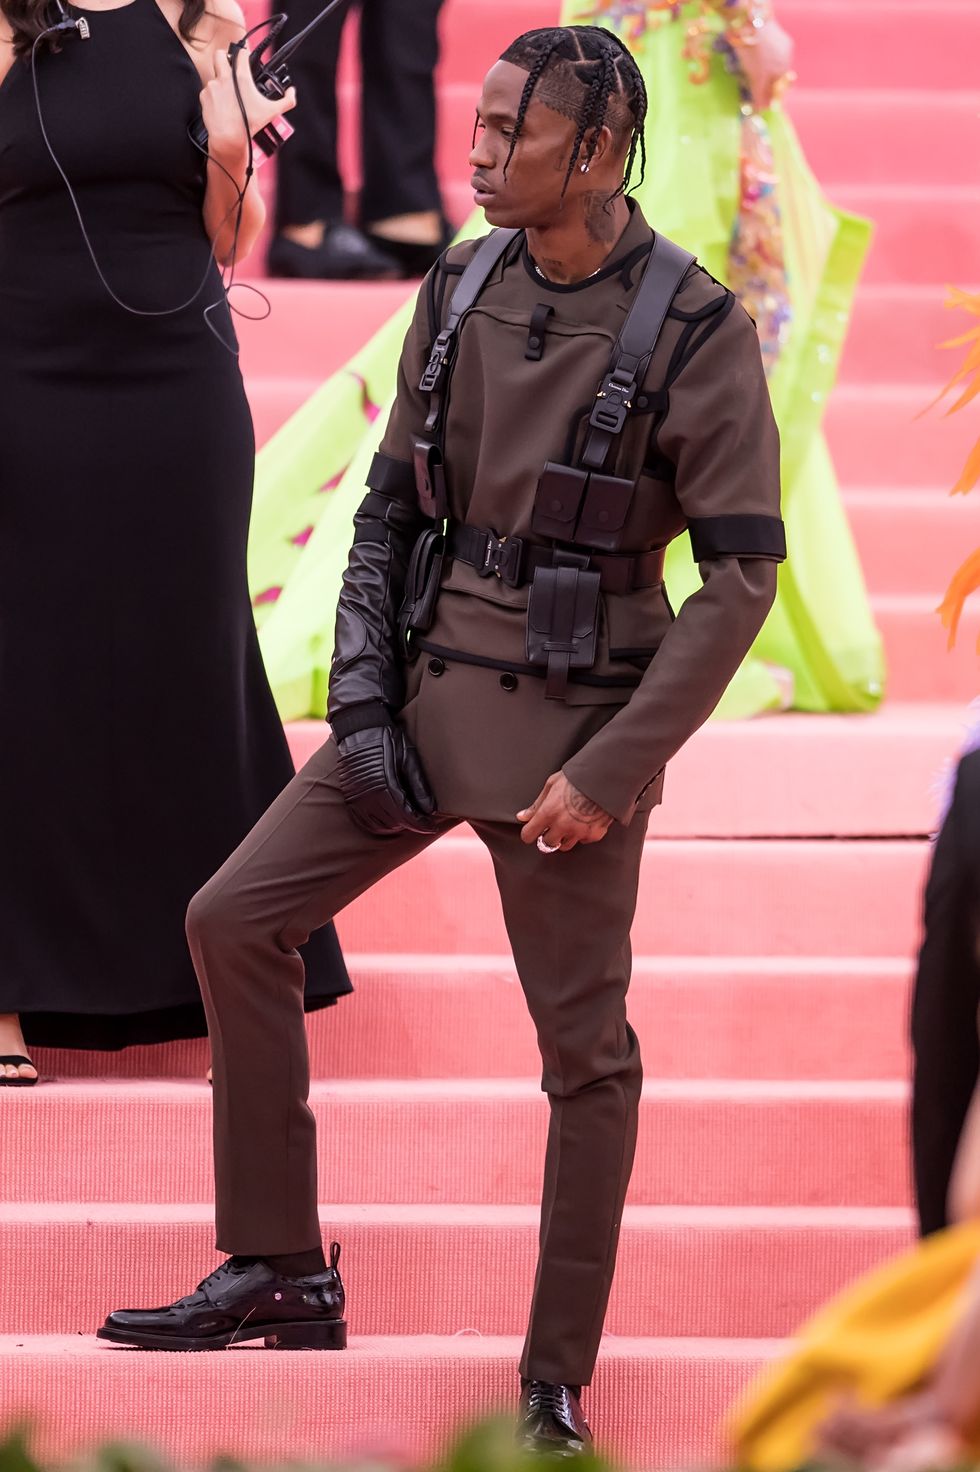 ic: Travis Scott pictured at the Met Gala in 2019. Image by Gilbert Carrasquillo / Getty Images